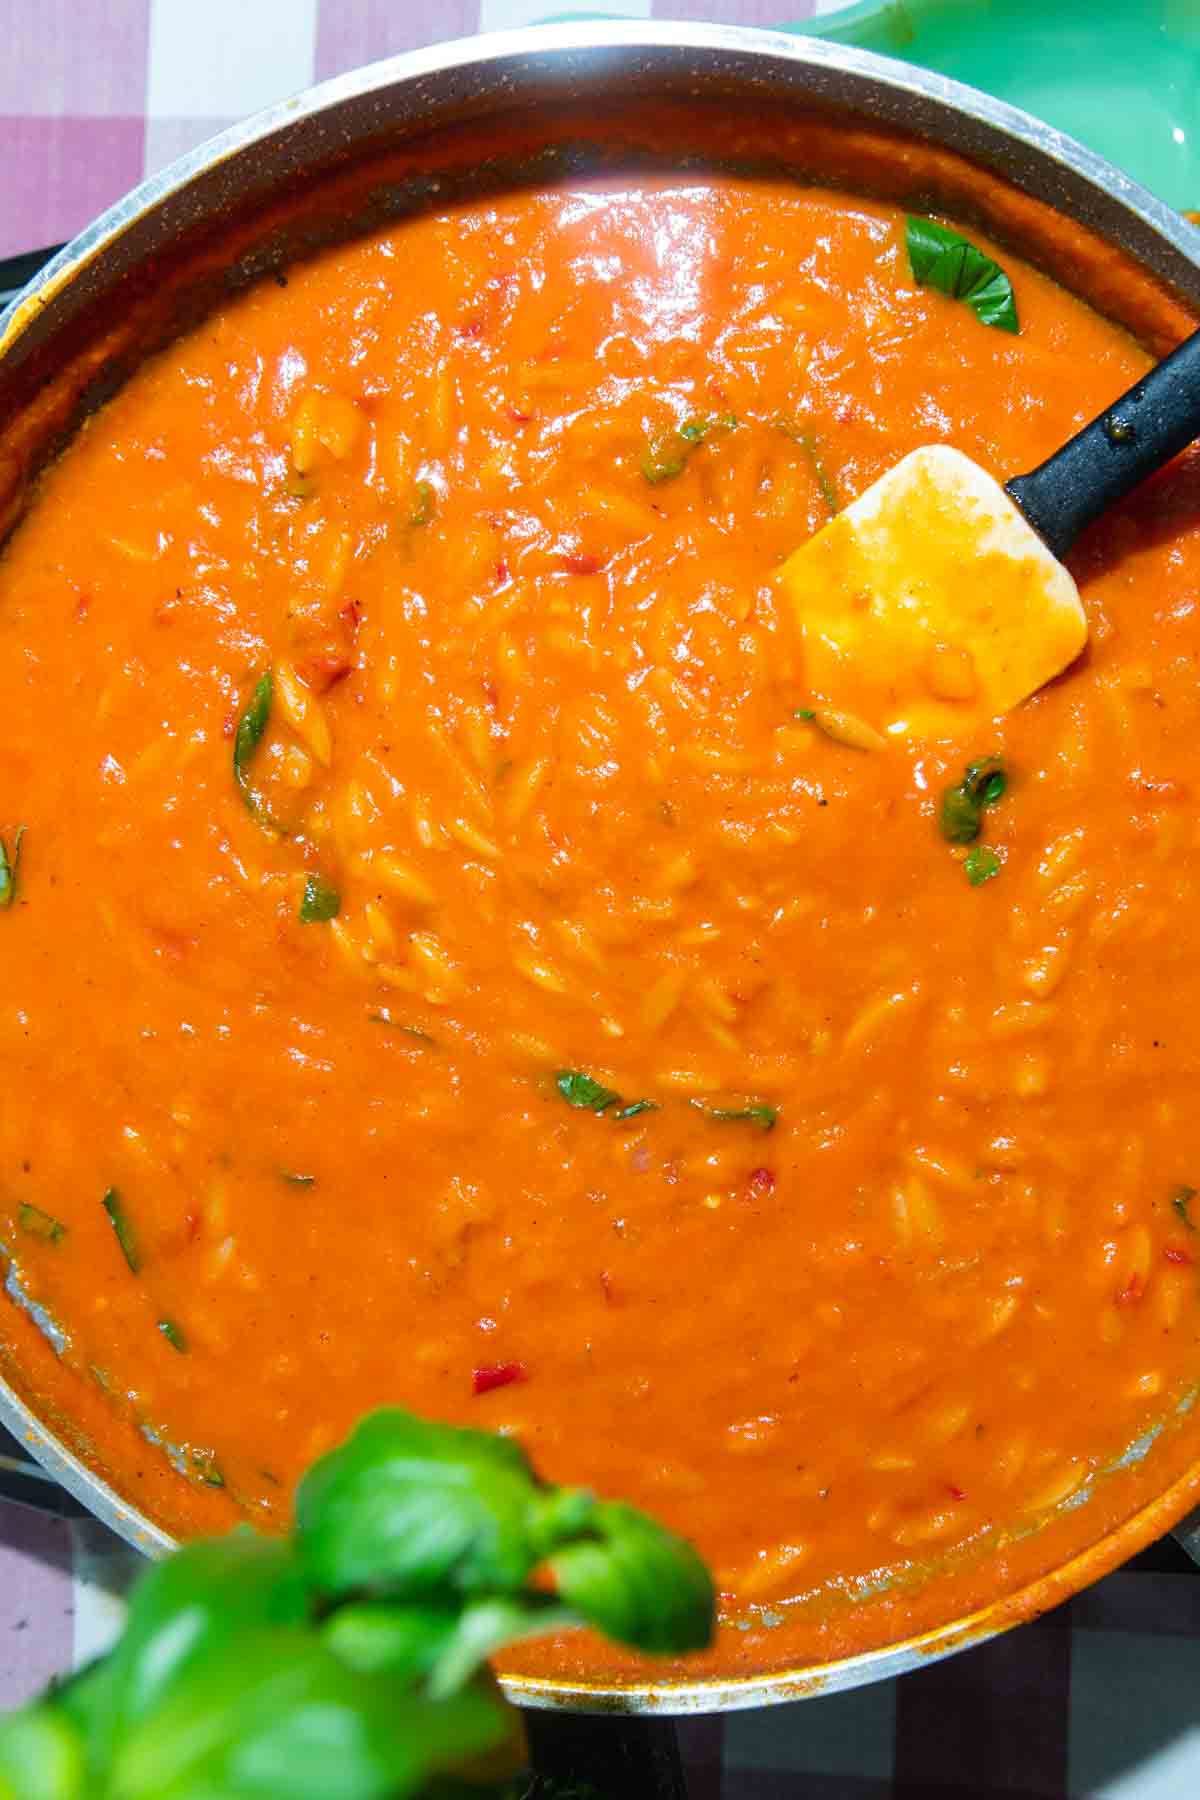 Orzo in an orange sauce in a skillet with a white spatula.